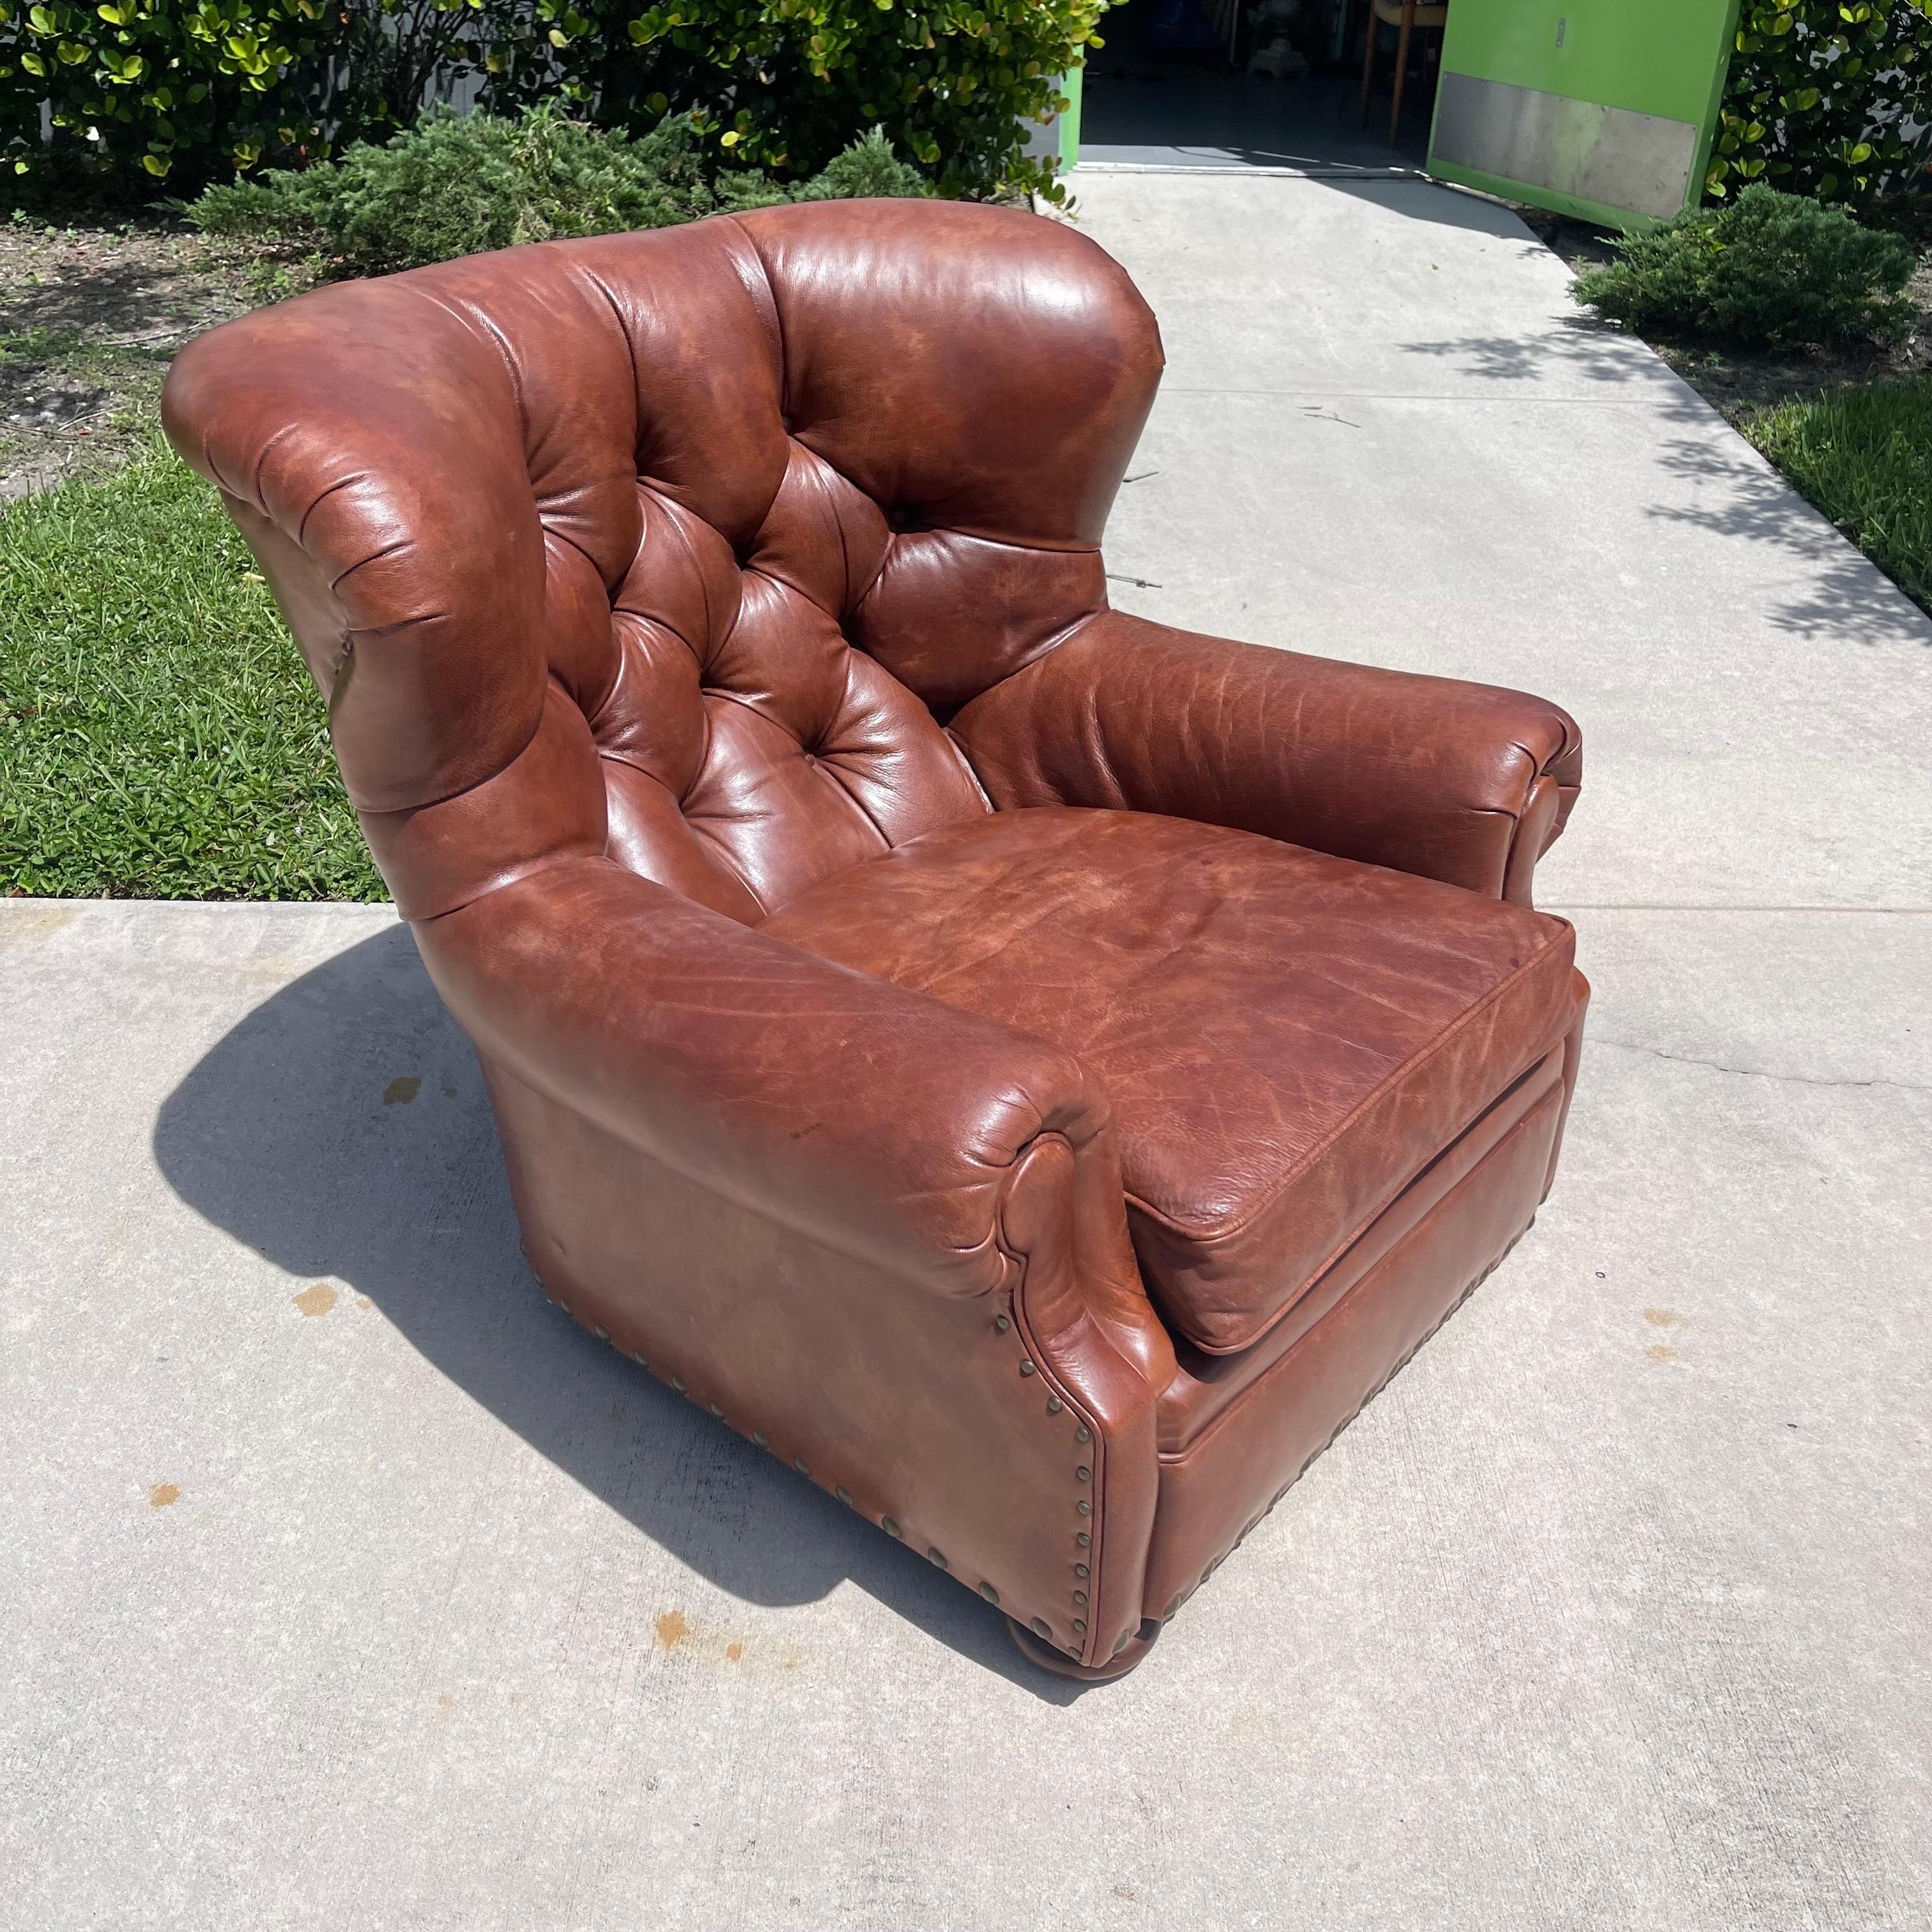 One of Ralph Lauren’s most iconic designs: the Writer’s Chair. Handcrafted, supple tufted leather envelopes you in this stately club chair. RL style and heirloom quality combined.